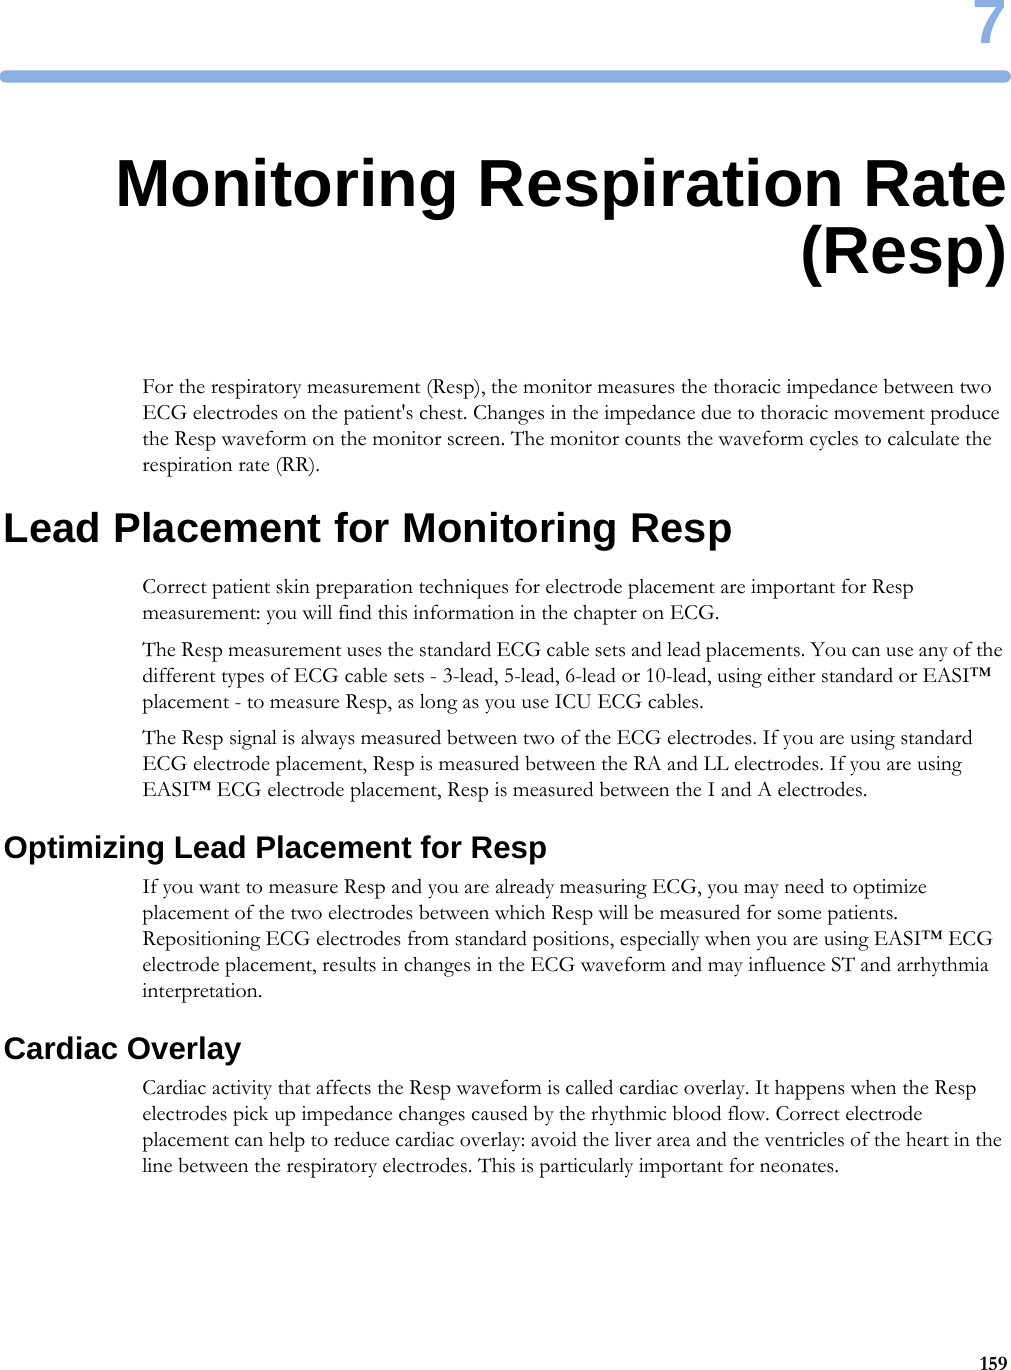 71597Monitoring Respiration Rate(Resp)For the respiratory measurement (Resp), the monitor measures the thoracic impedance between two ECG electrodes on the patient&apos;s chest. Changes in the impedance due to thoracic movement produce the Resp waveform on the monitor screen. The monitor counts the waveform cycles to calculate the respiration rate (RR).Lead Placement for Monitoring RespCorrect patient skin preparation techniques for electrode placement are important for Resp measurement: you will find this information in the chapter on ECG.The Resp measurement uses the standard ECG cable sets and lead placements. You can use any of the different types of ECG cable sets - 3-lead, 5-lead, 6-lead or 10-lead, using either standard or EASI™ placement - to measure Resp, as long as you use ICU ECG cables.The Resp signal is always measured between two of the ECG electrodes. If you are using standard ECG electrode placement, Resp is measured between the RA and LL electrodes. If you are using EASI™ ECG electrode placement, Resp is measured between the I and A electrodes.Optimizing Lead Placement for RespIf you want to measure Resp and you are already measuring ECG, you may need to optimize placement of the two electrodes between which Resp will be measured for some patients. Repositioning ECG electrodes from standard positions, especially when you are using EASI™ ECG electrode placement, results in changes in the ECG waveform and may influence ST and arrhythmia interpretation.Cardiac OverlayCardiac activity that affects the Resp waveform is called cardiac overlay. It happens when the Resp electrodes pick up impedance changes caused by the rhythmic blood flow. Correct electrode placement can help to reduce cardiac overlay: avoid the liver area and the ventricles of the heart in the line between the respiratory electrodes. This is particularly important for neonates.